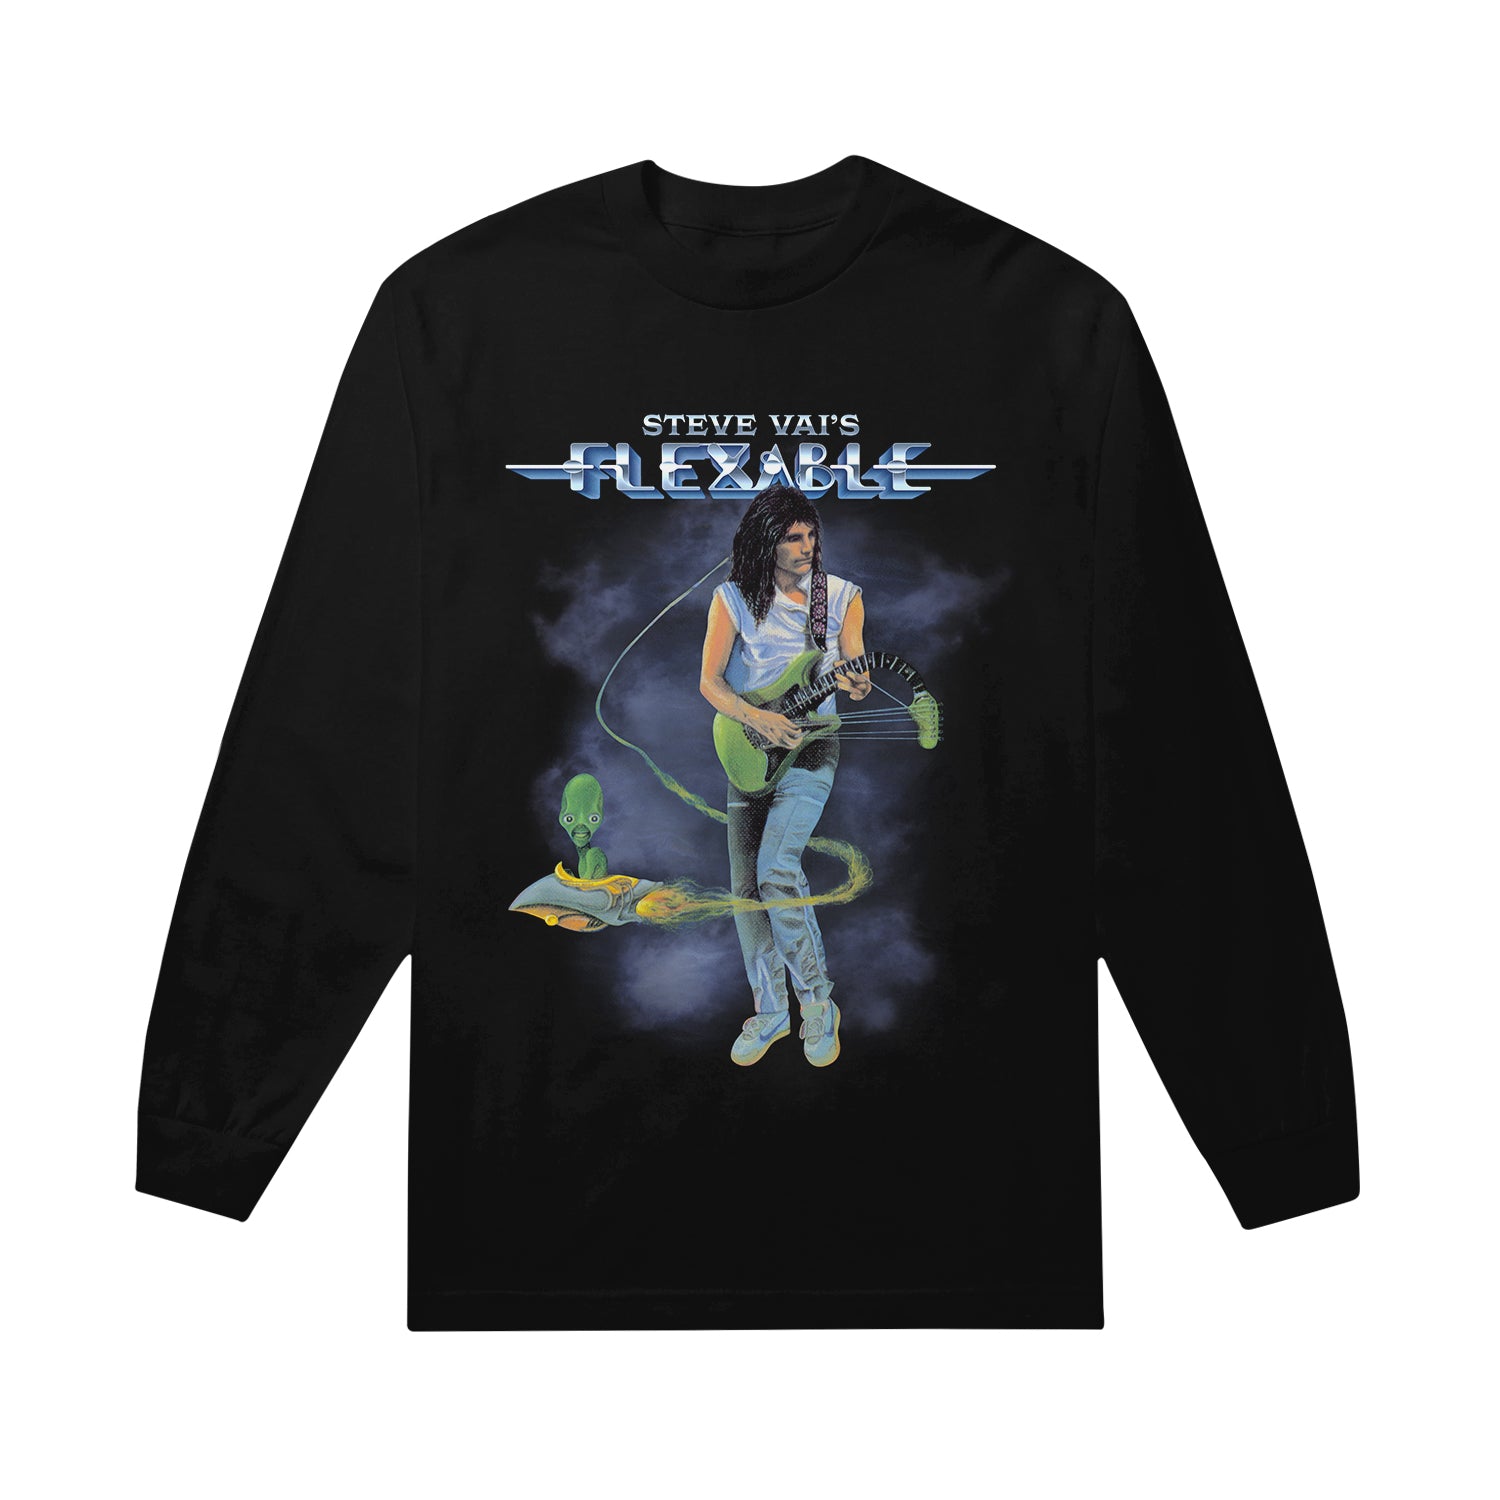 Image of a black longsleeve against white background. there is a graphic of steve vai playing a green guitar. the neck of the guitar droops down. swirling around steve is an alien in a small ship. above this in blue and white text reads "steve vai's flexable". 